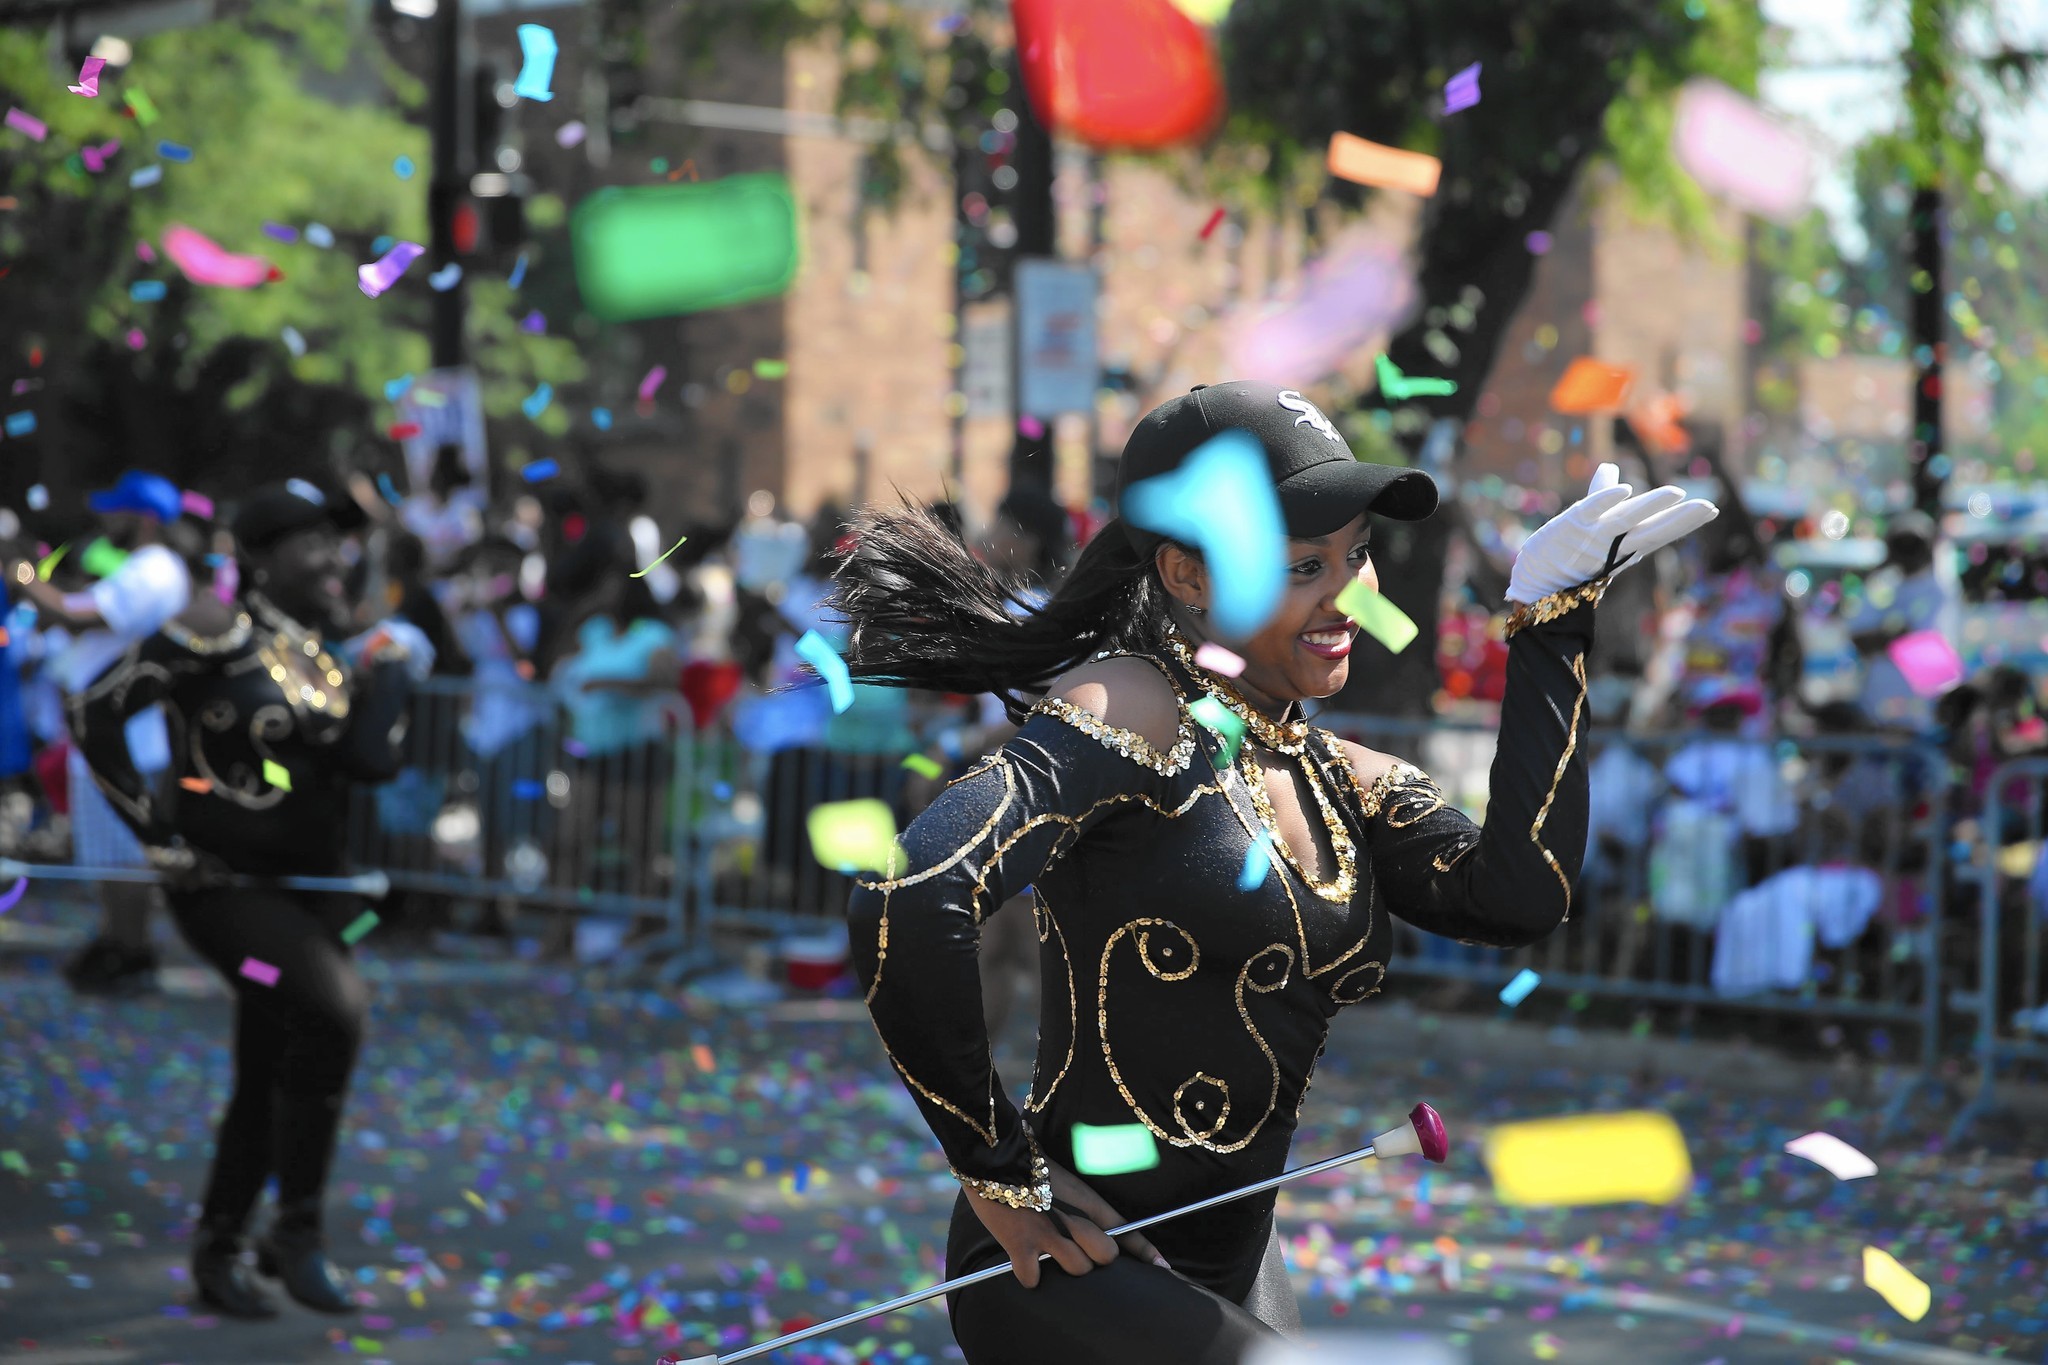 Not a worry in sight as people celebrate at Bud Billiken Parade - Chicago Tribune2048 x 1365